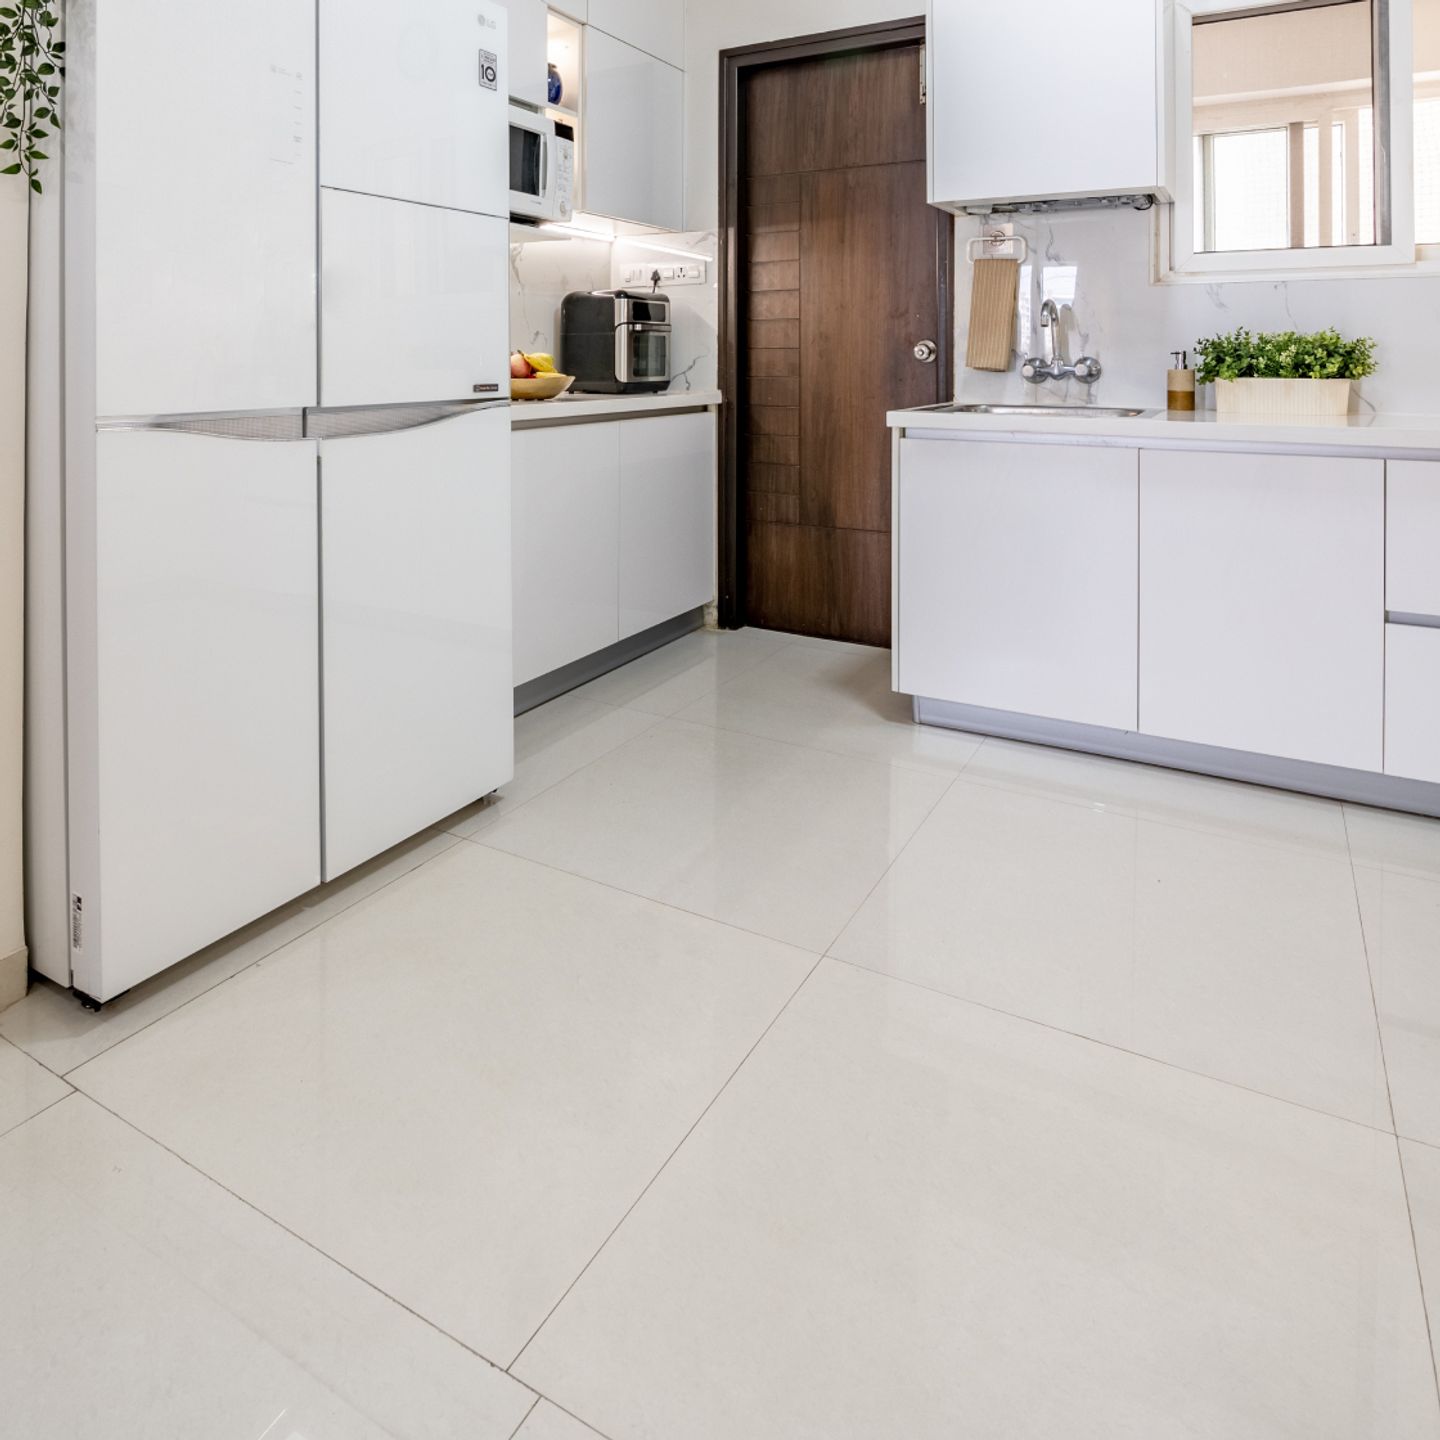 Beige Ceramic Floor Tiles With A Glossy Finish - Livspace